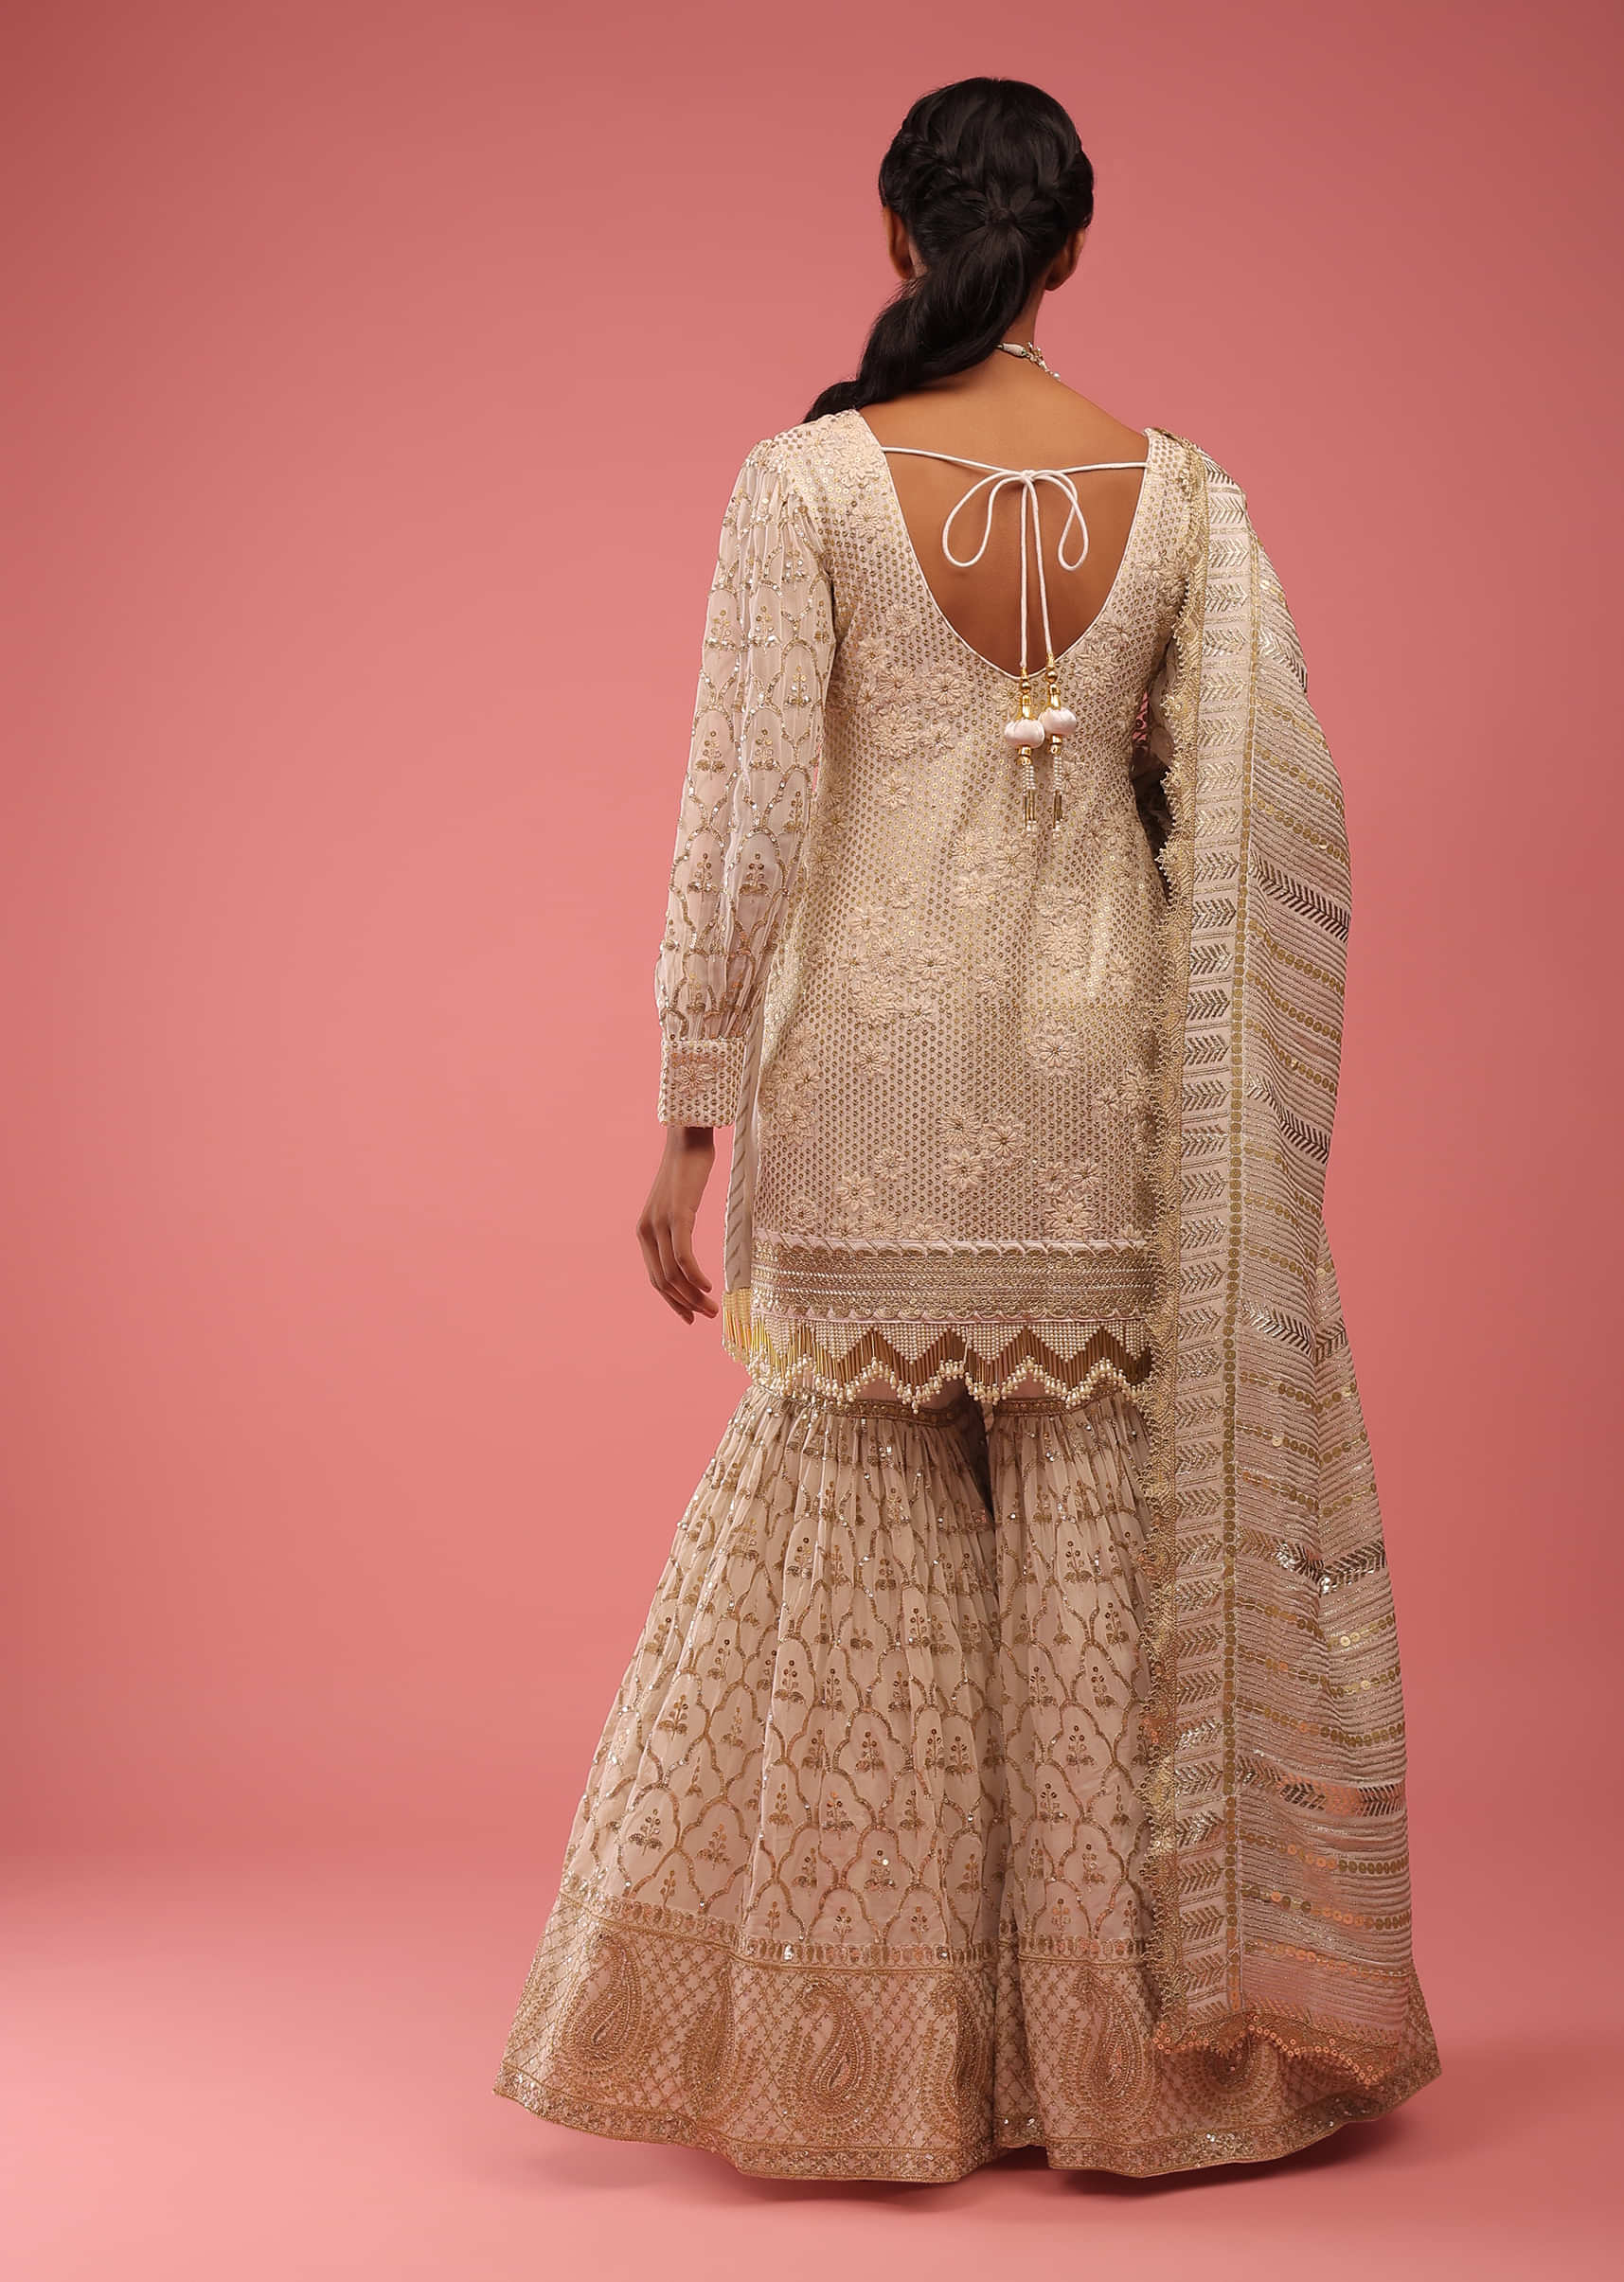 Off-White Sharara Suit With Golden Zari Embroidery With Fringes